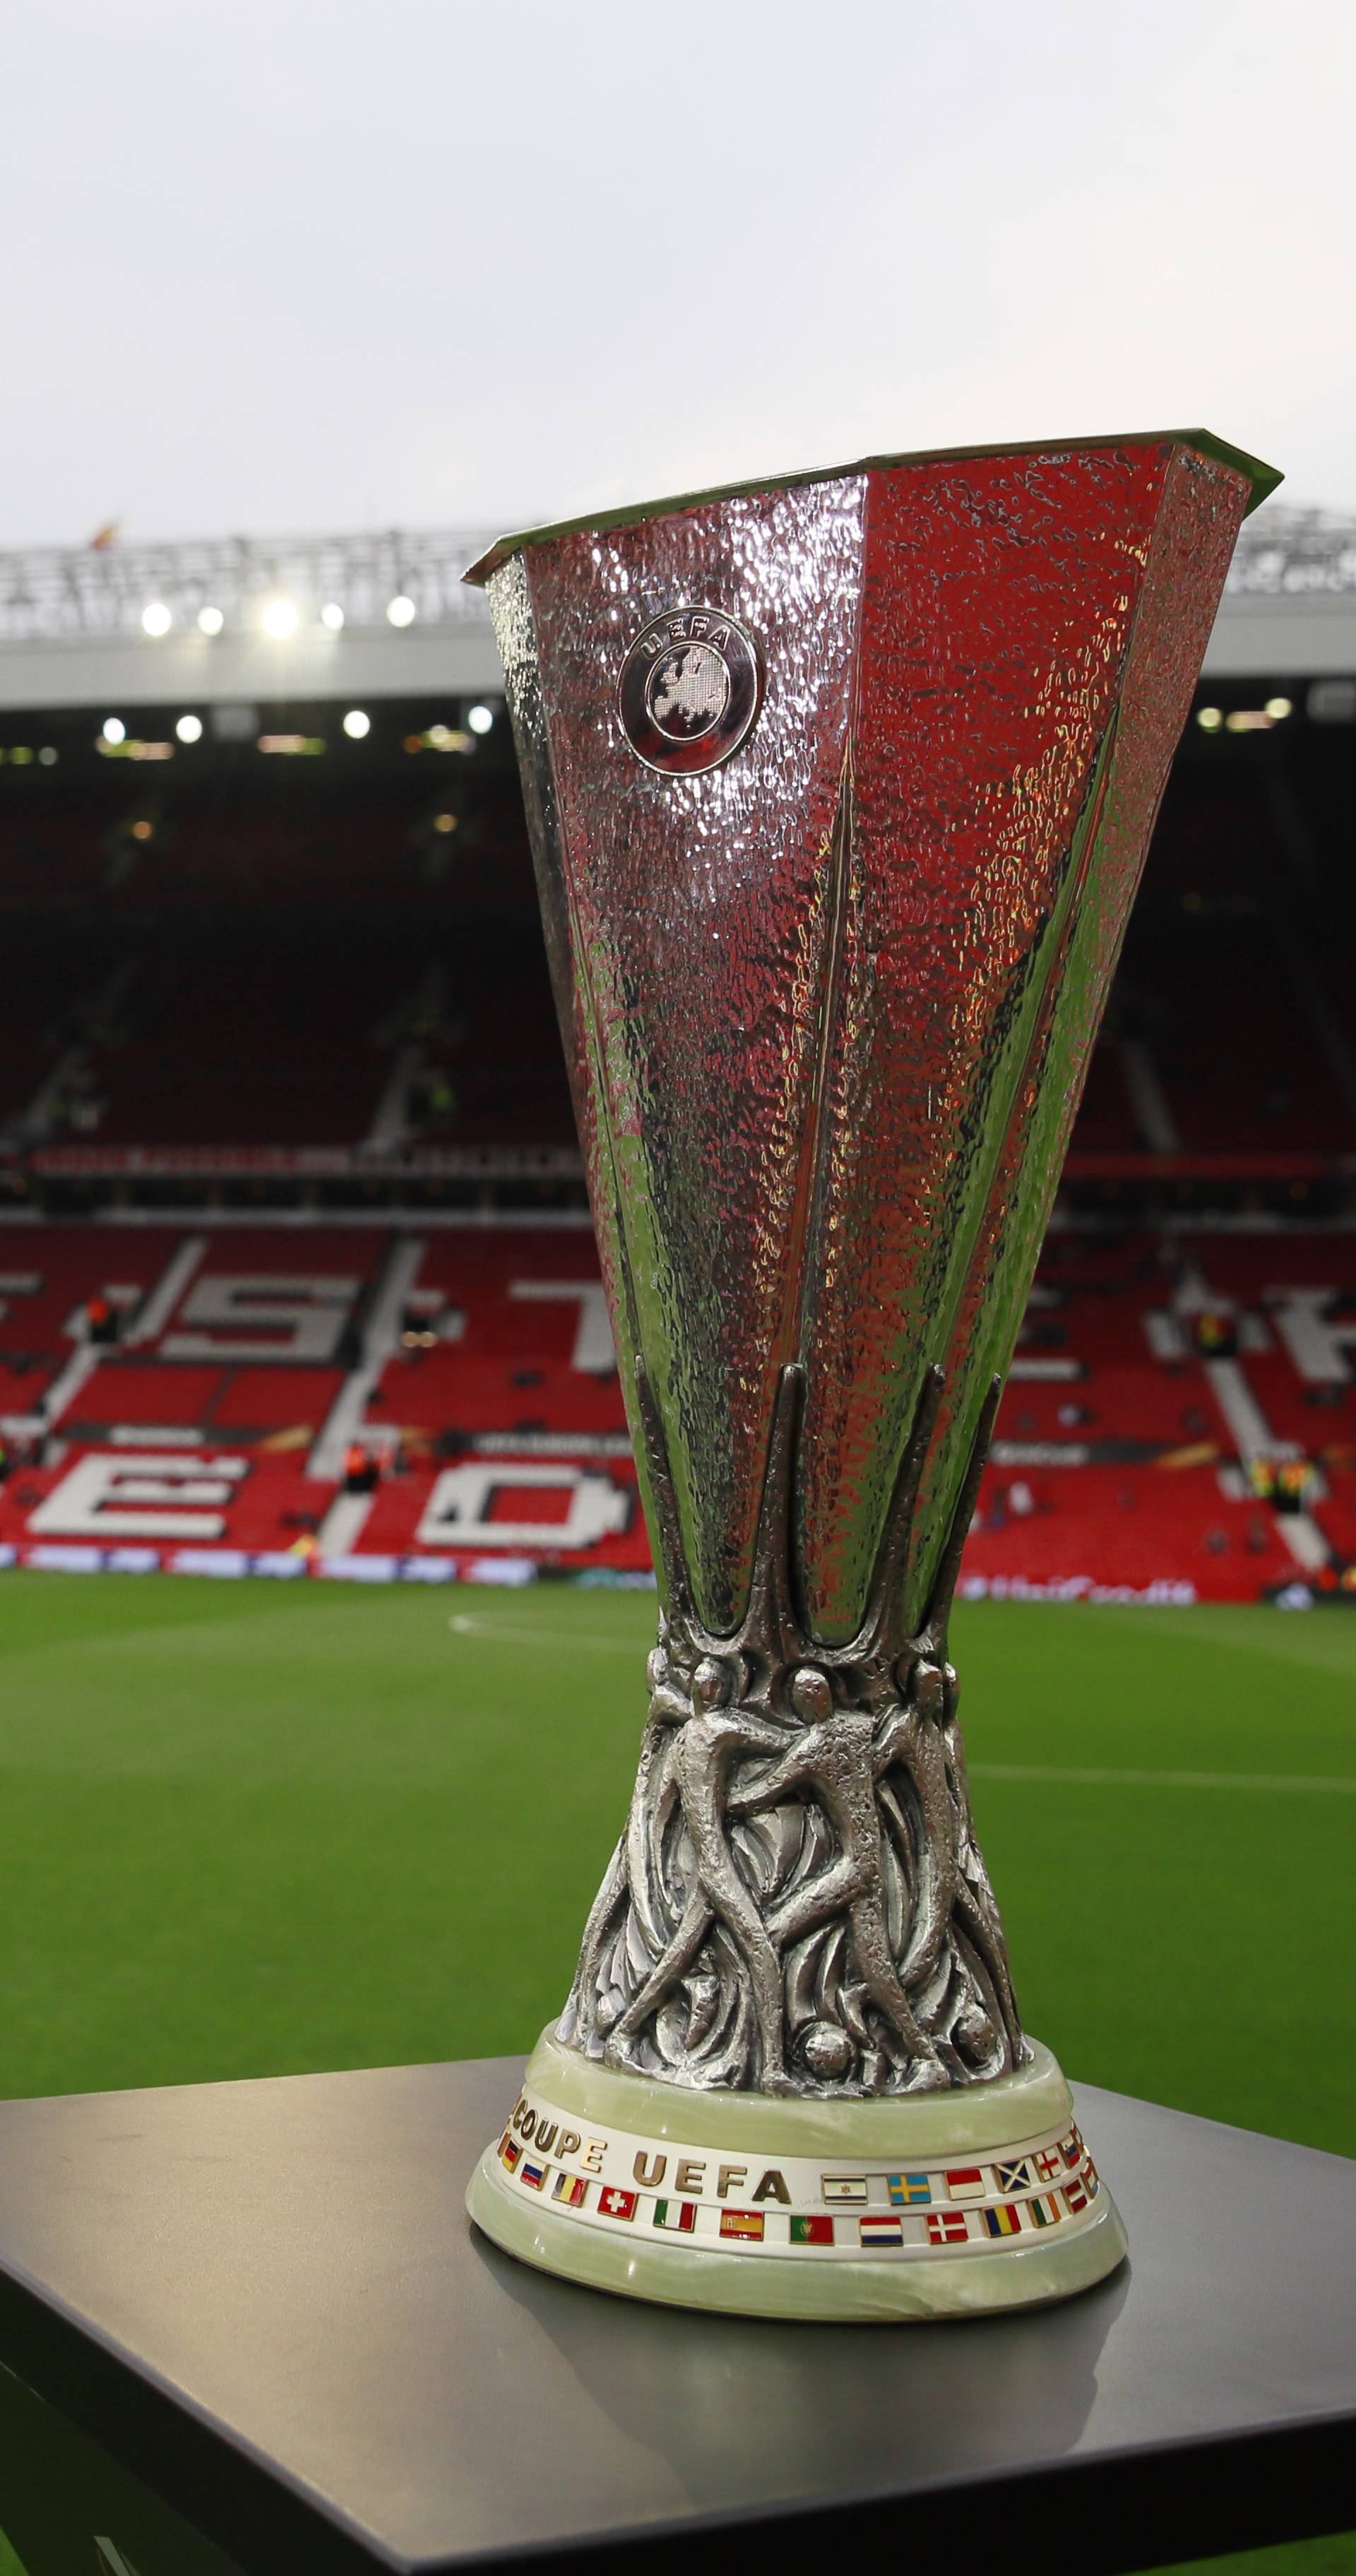 The UEFA Europa League trophy before the match